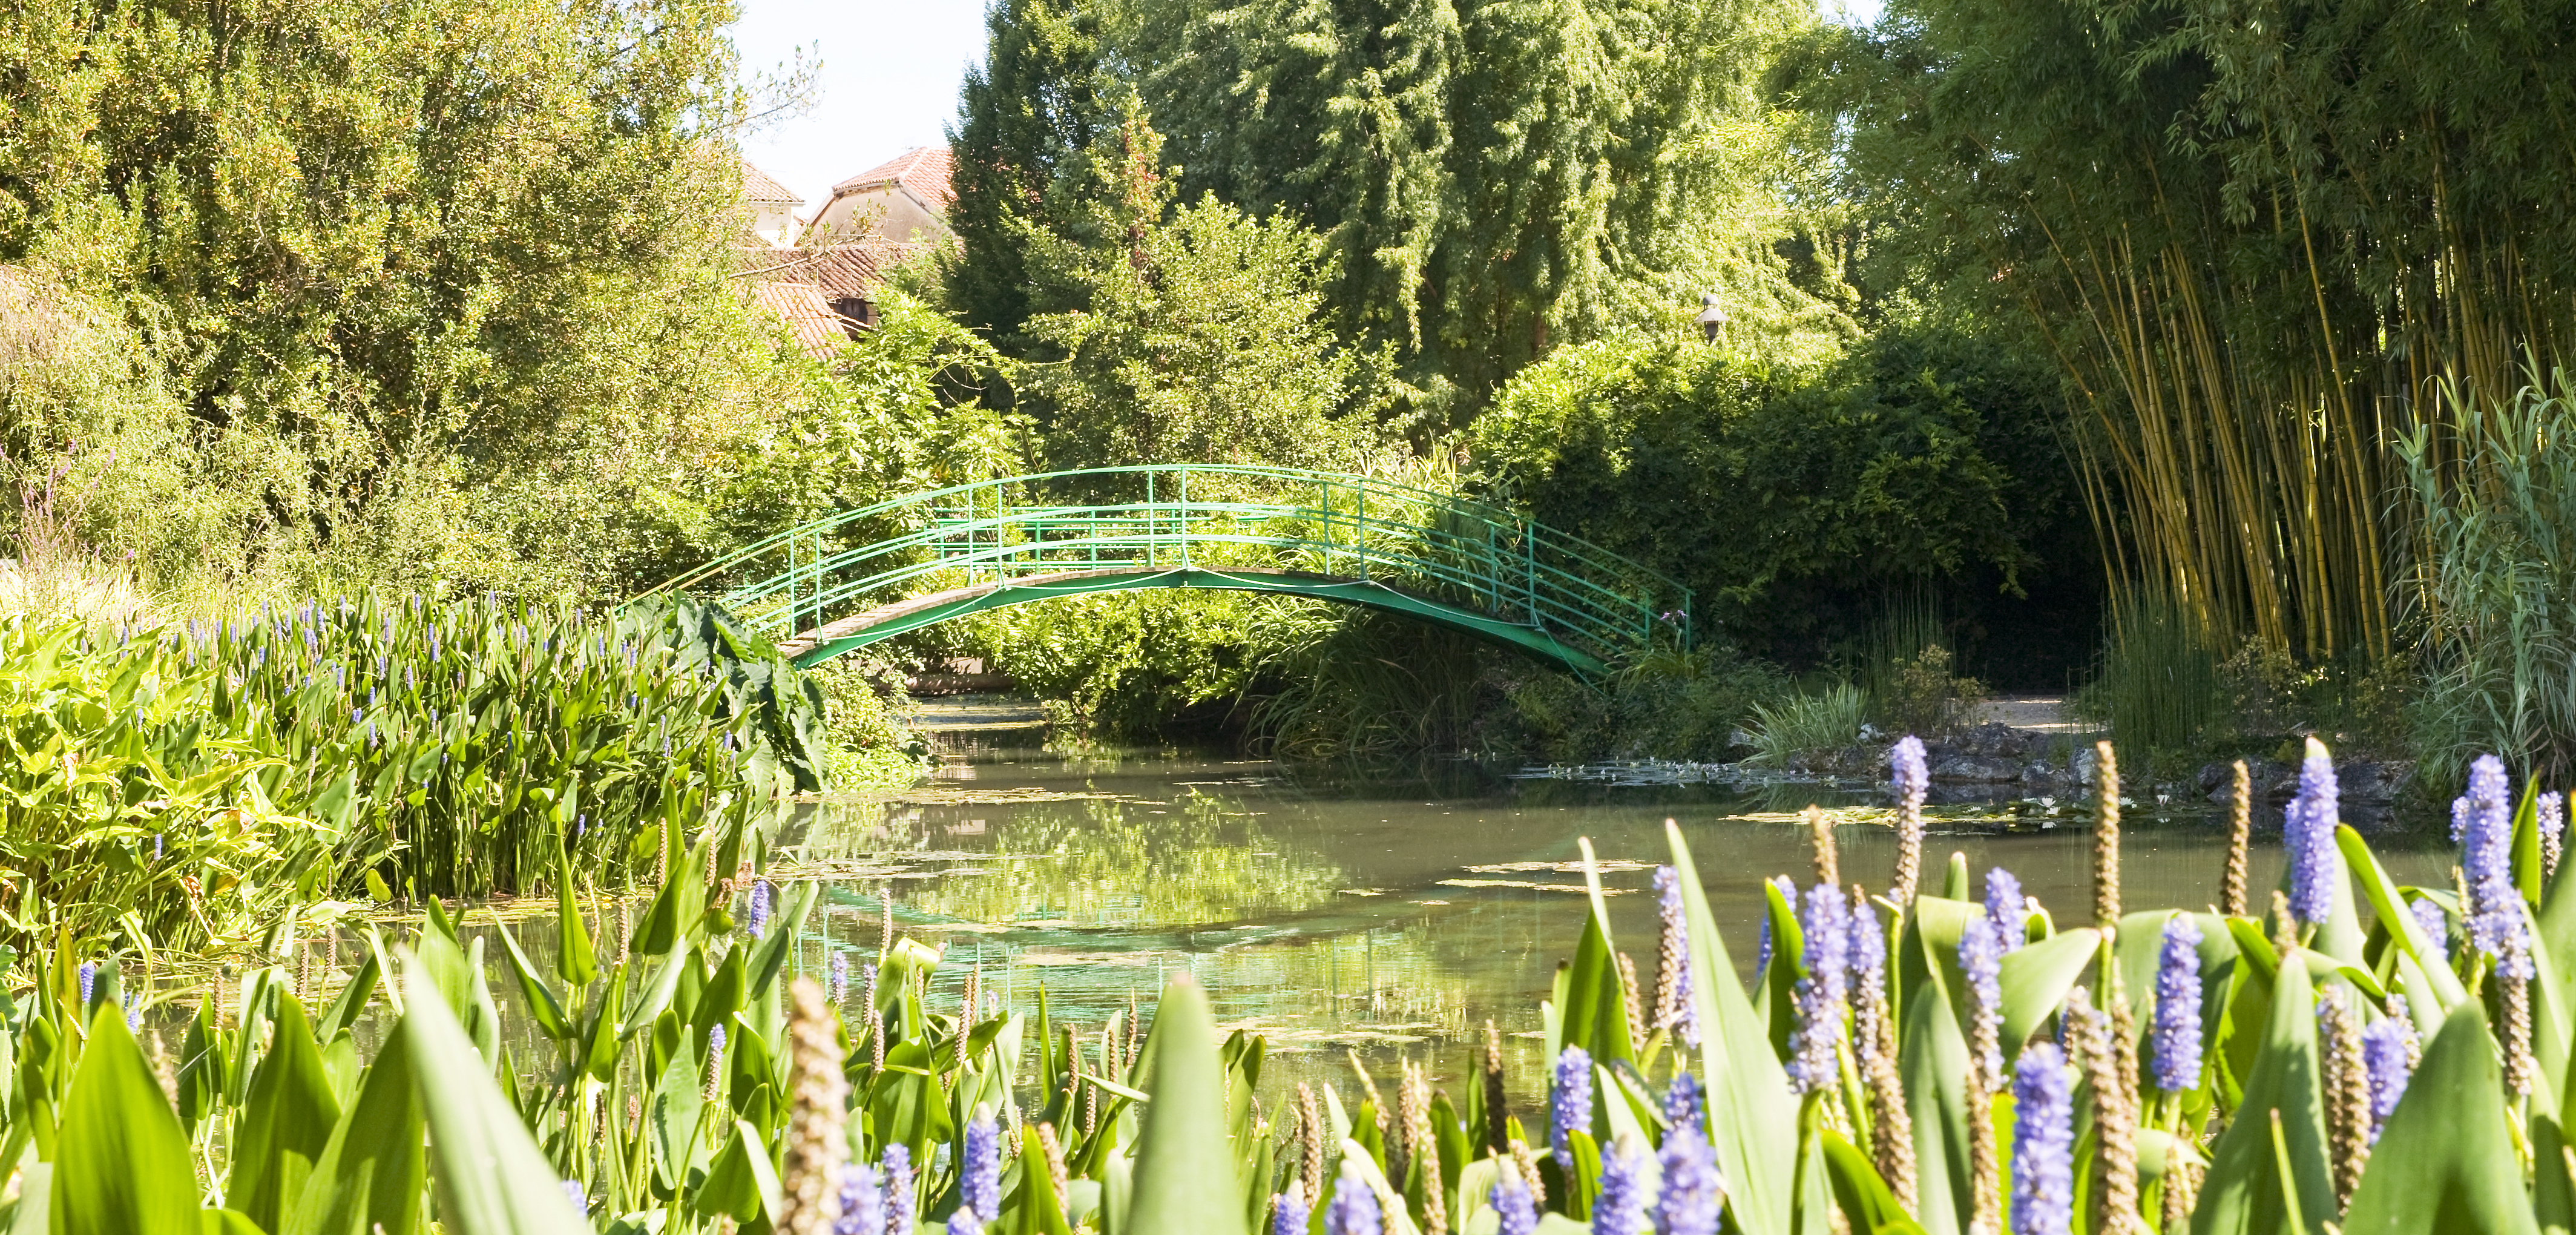 Monet’s Bridge and garden at Giverny